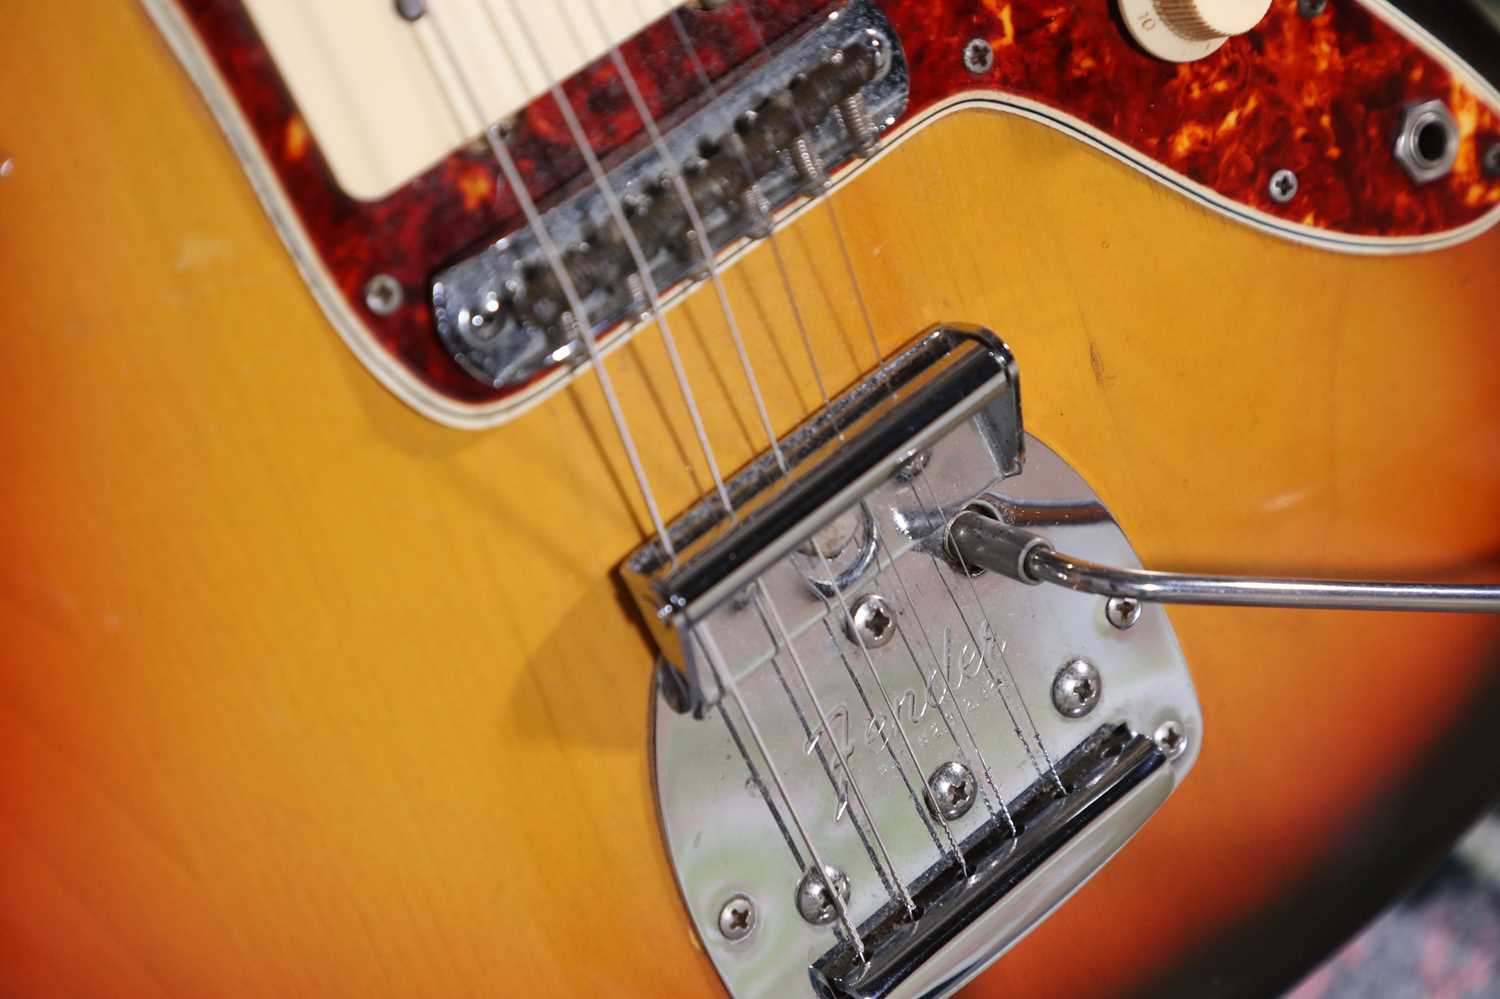 A 1965 Fender Jazzmaster electric guitar, - Image 5 of 16